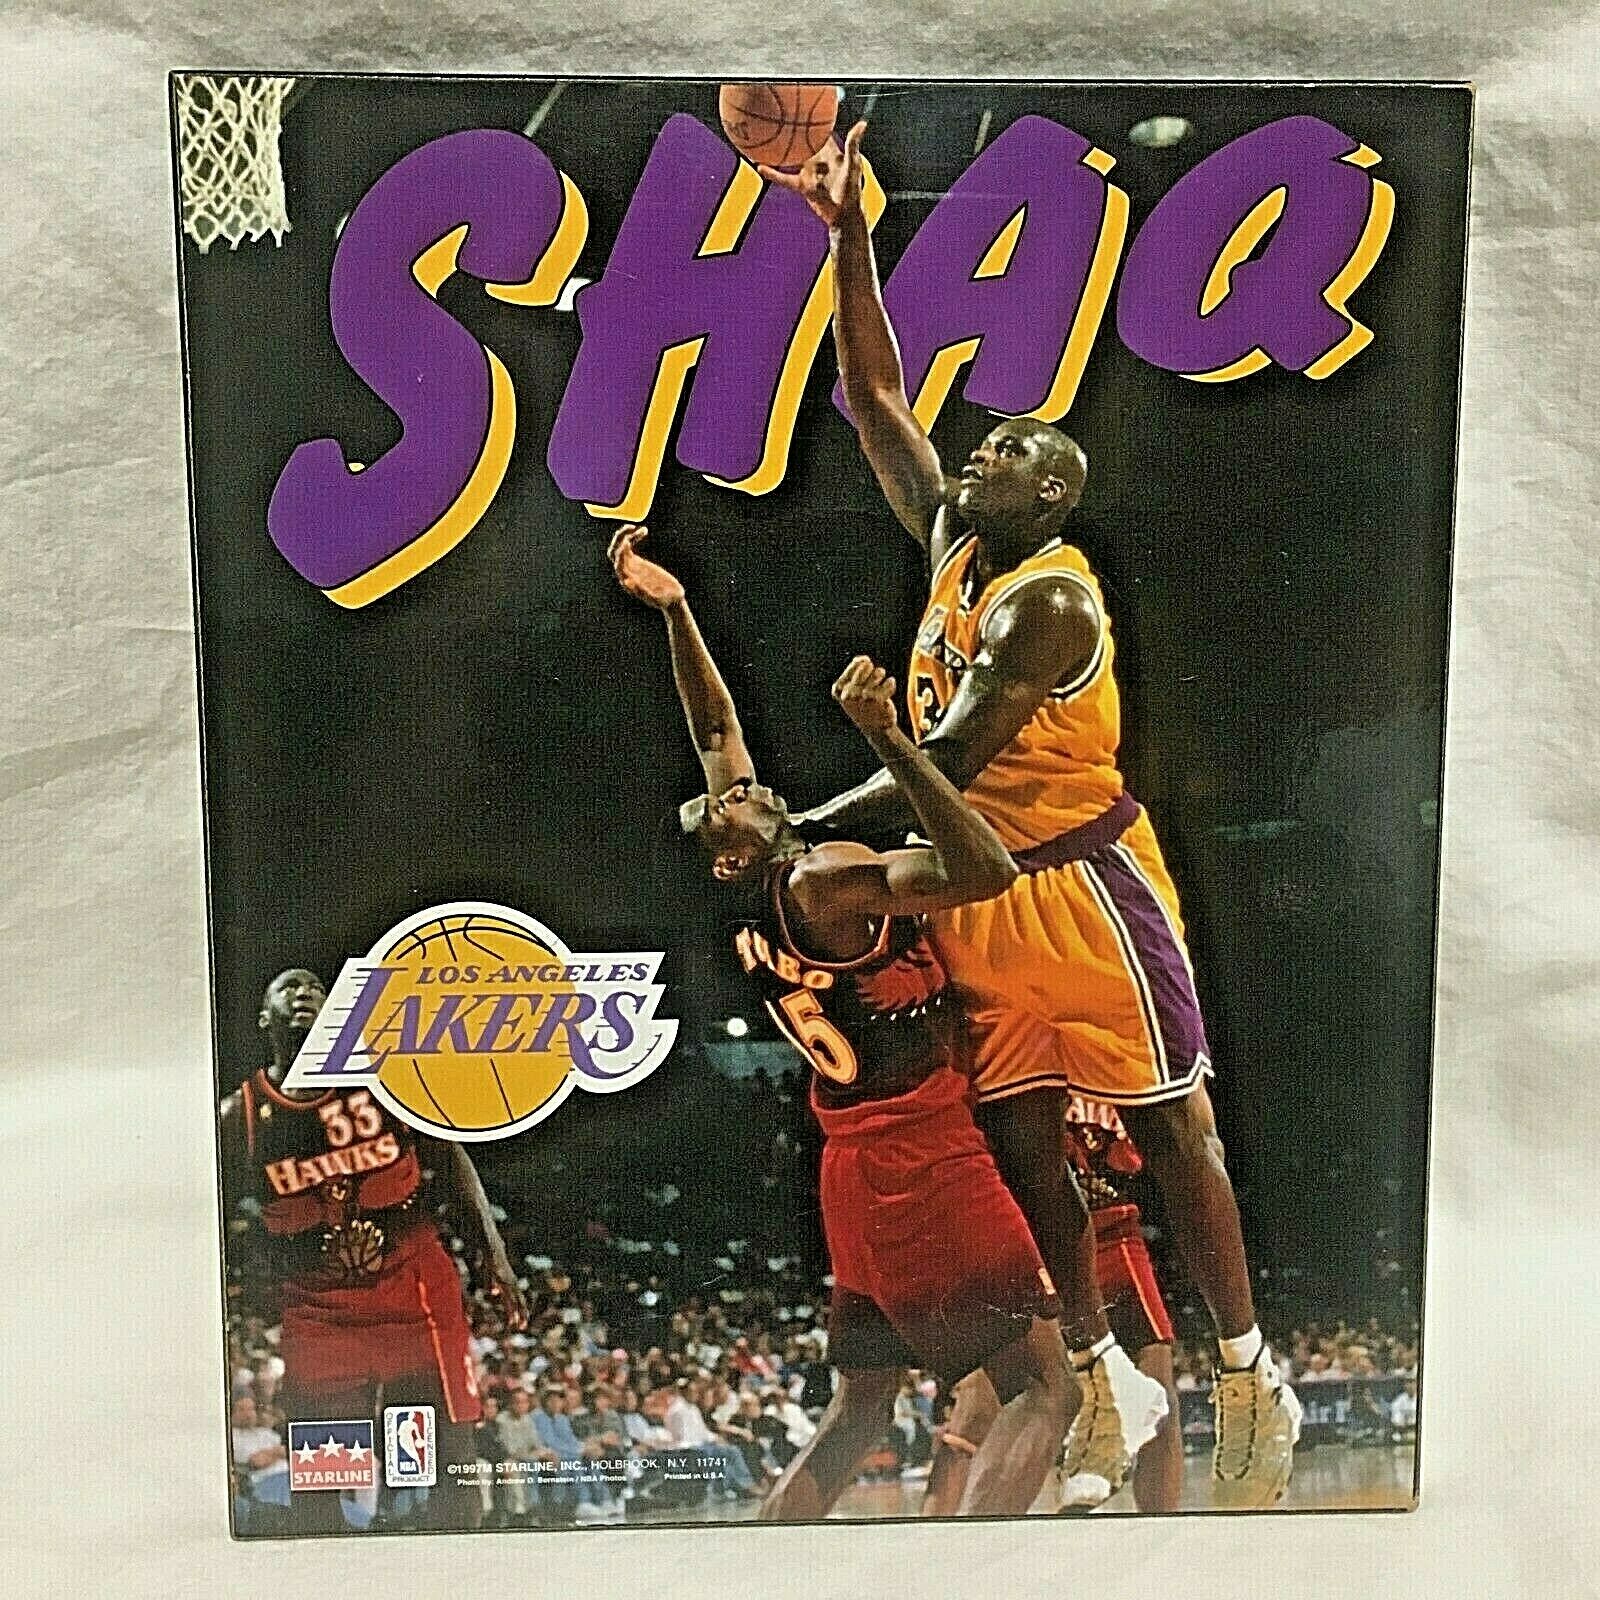 1997 Starline, Shaquille O'neal Wall Plaque, 9" X 7 3/4"